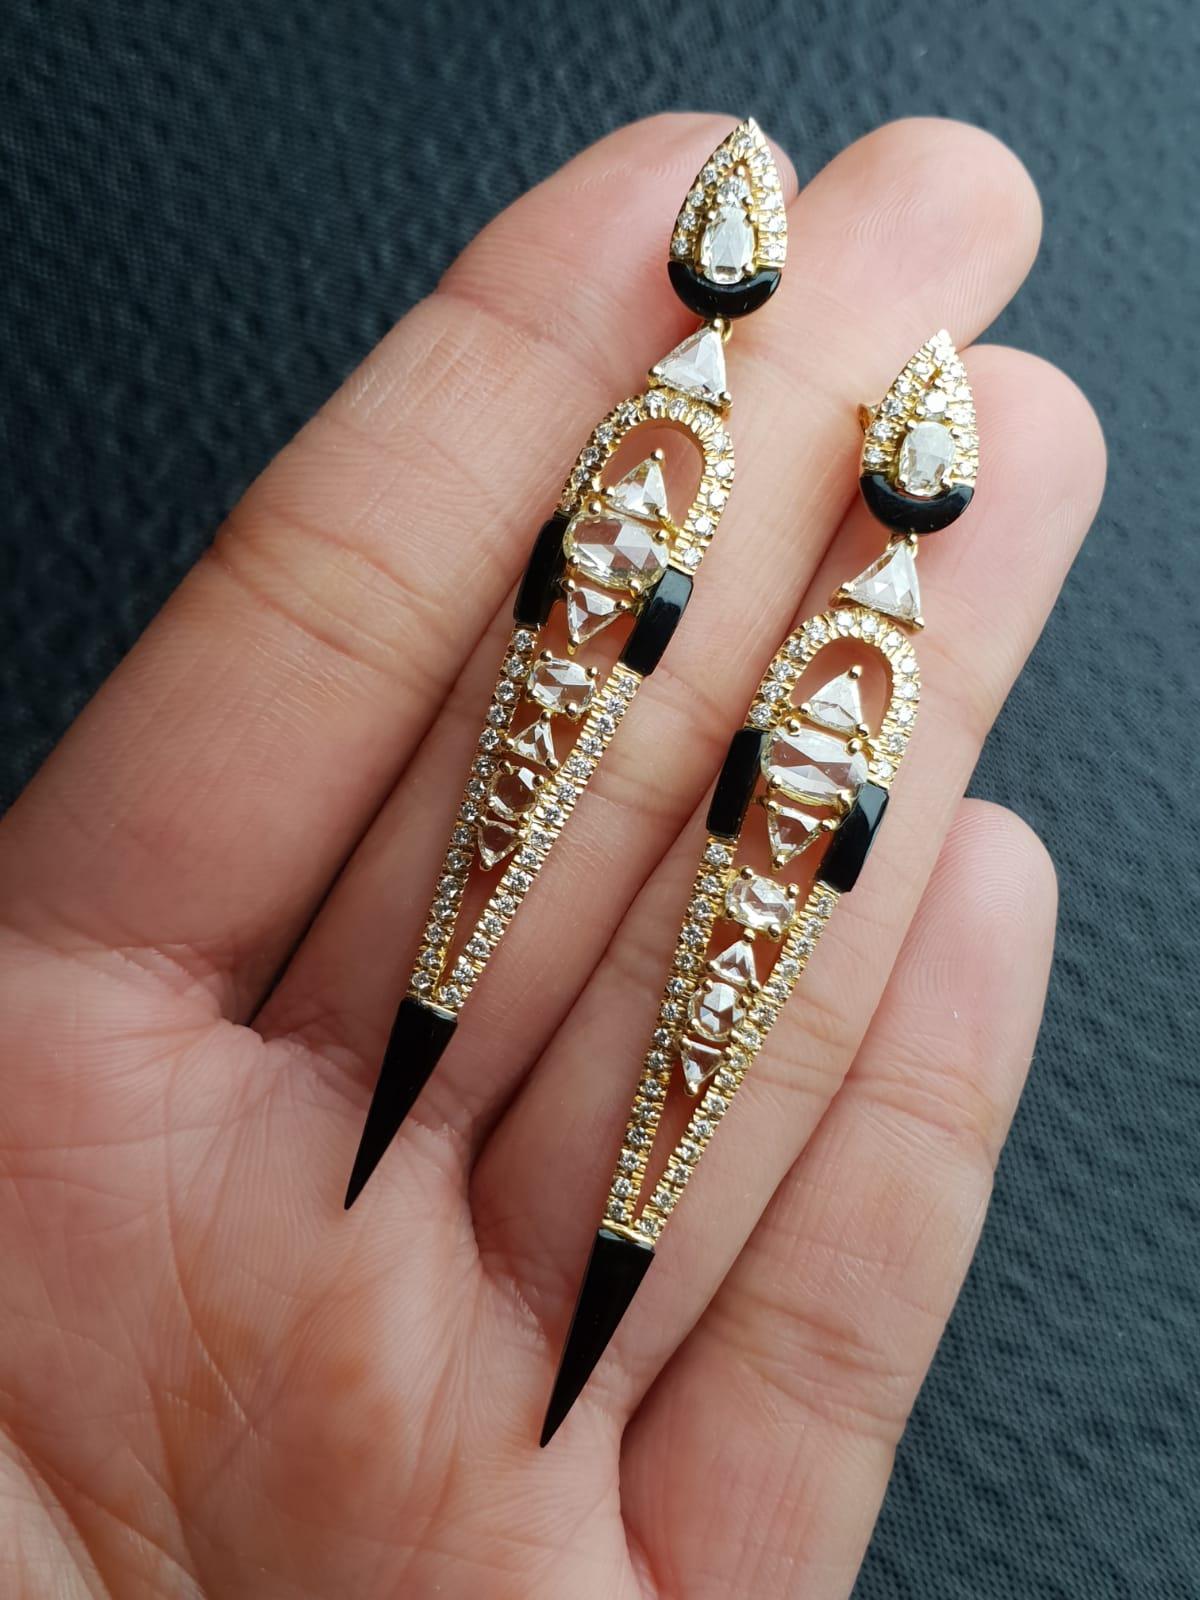 An absolutely gorgeous art-deco looking, modern pair of earrings. Various shapes of rose cut and full cut white diamonds are set in 18K Gold. The use of black onyx makes the design of the earrings very unique. This super light weight pair comes with